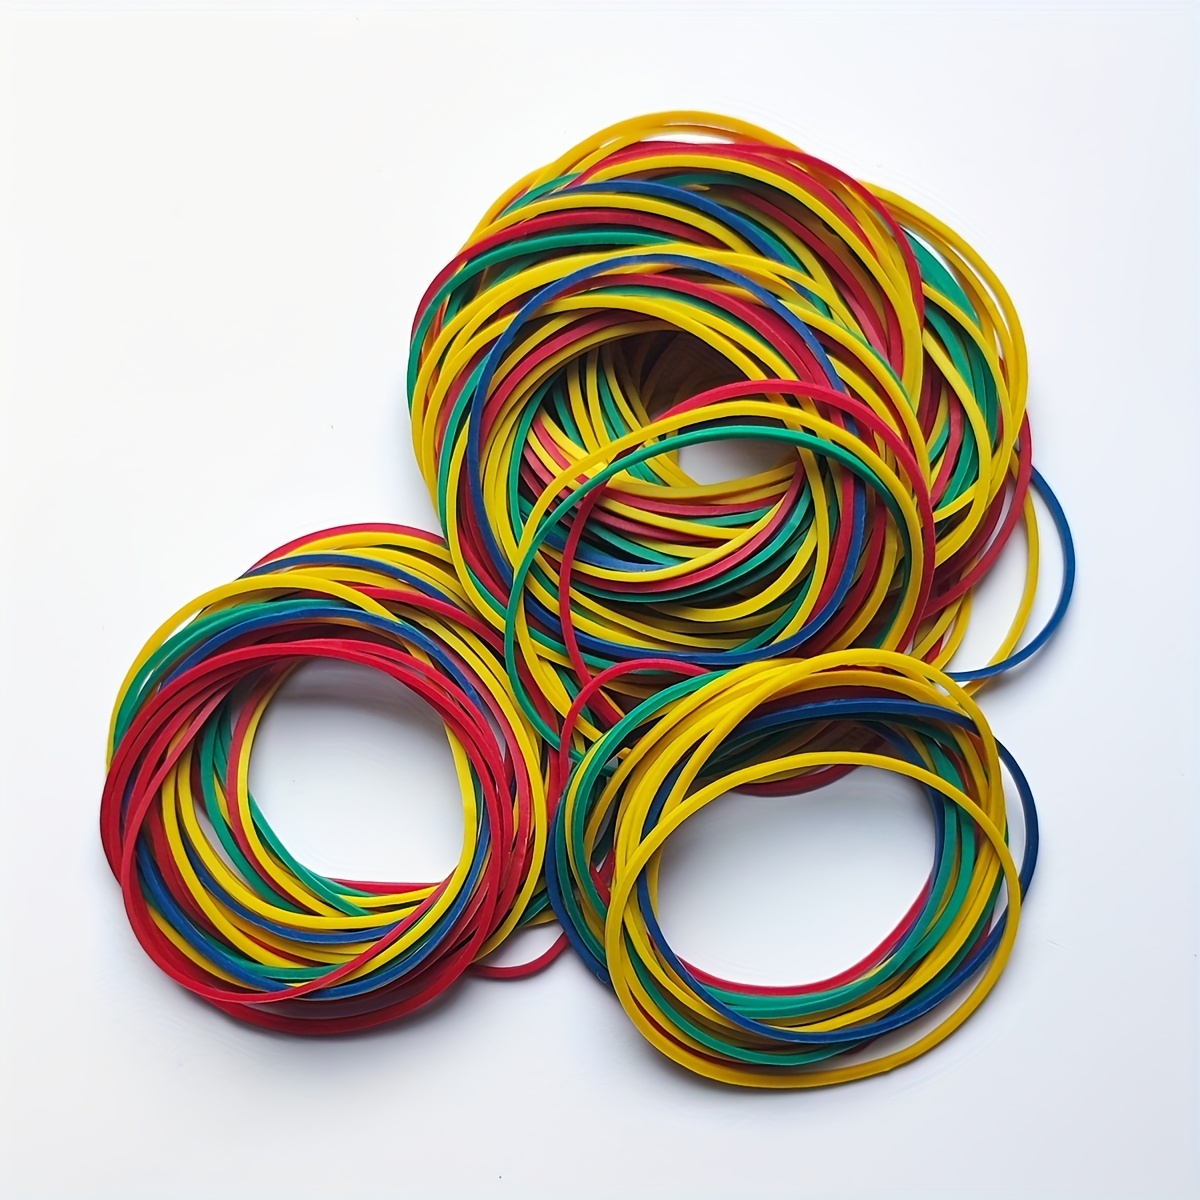 100/200 Pieces Of Multi-colored Rubber Bands With A Diameter Of 38mm,  Office Supplies For Schools And Families, Elastic Bands